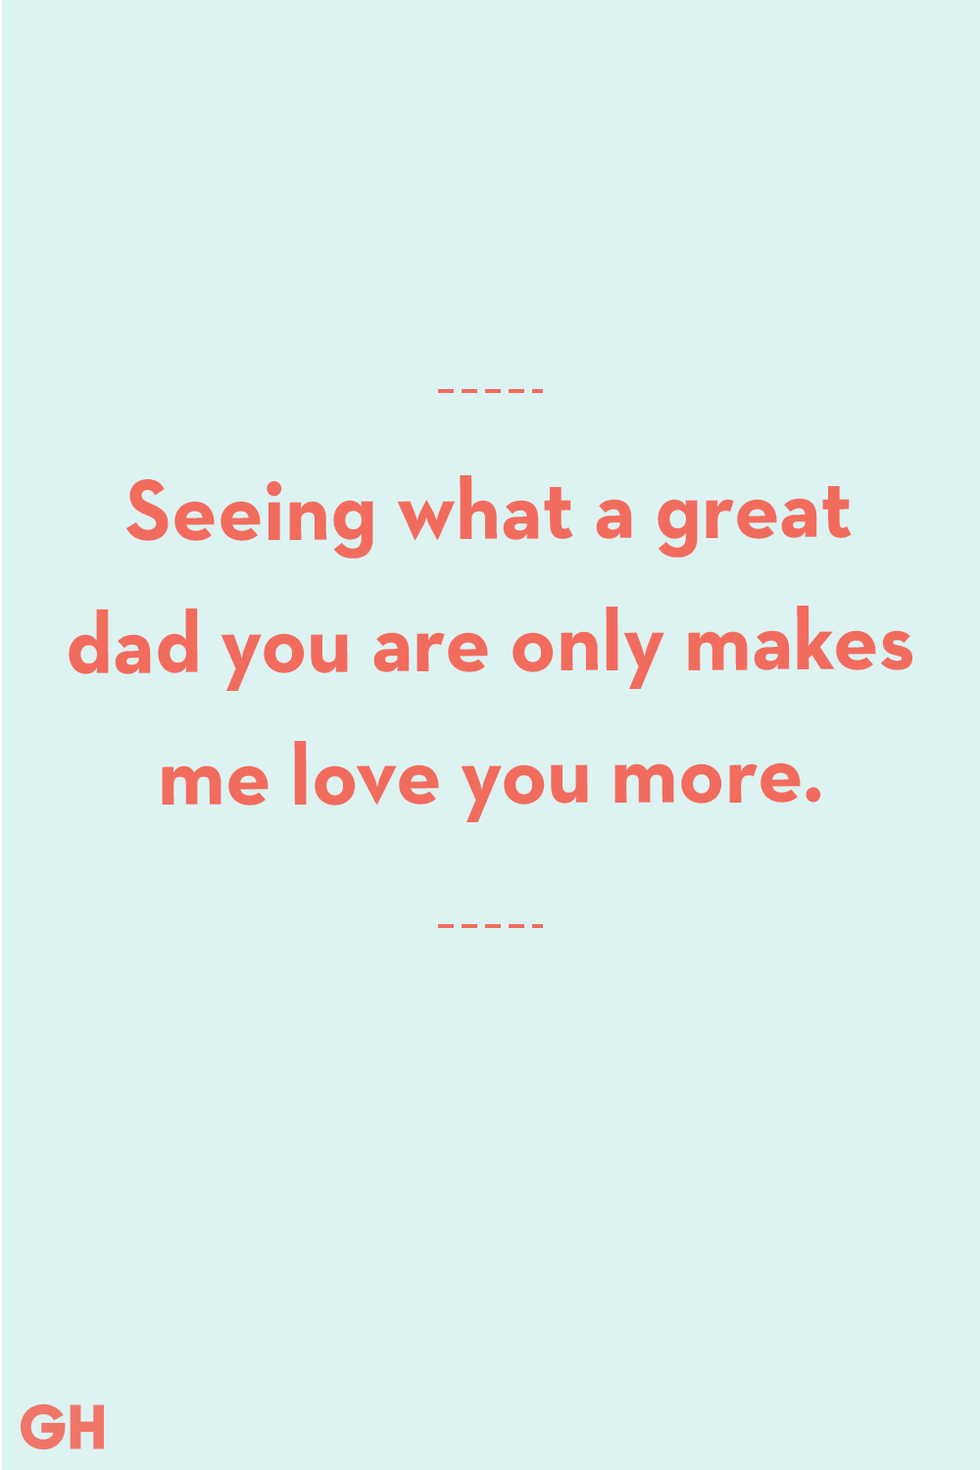 fathers day quotes from wife